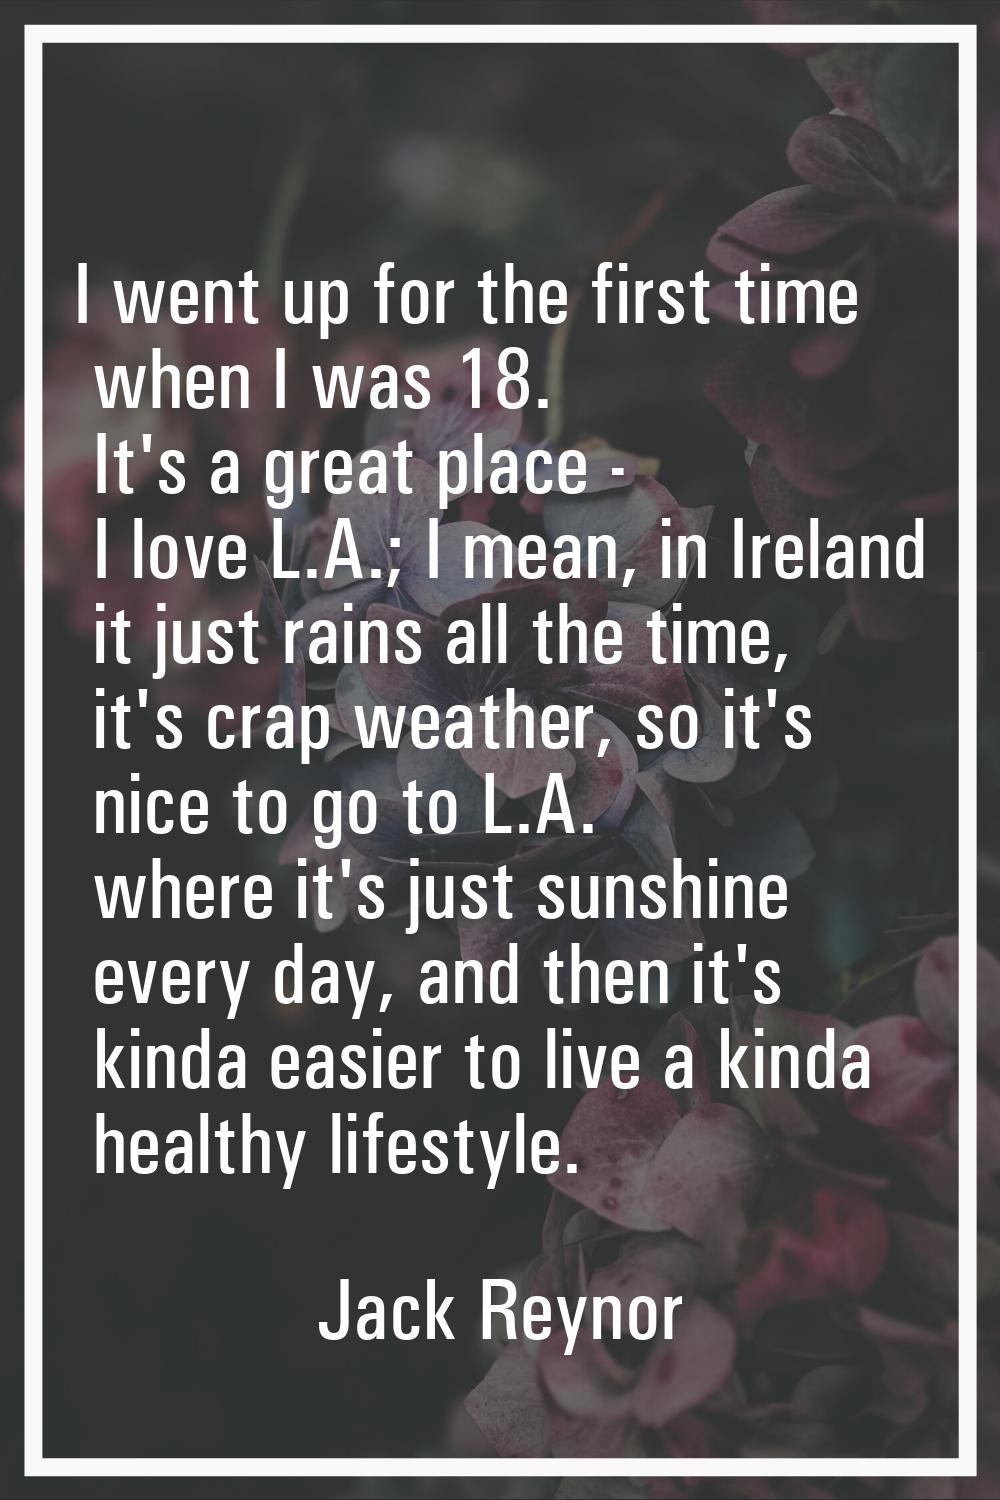 I went up for the first time when I was 18. It's a great place - I love L.A.; I mean, in Ireland it